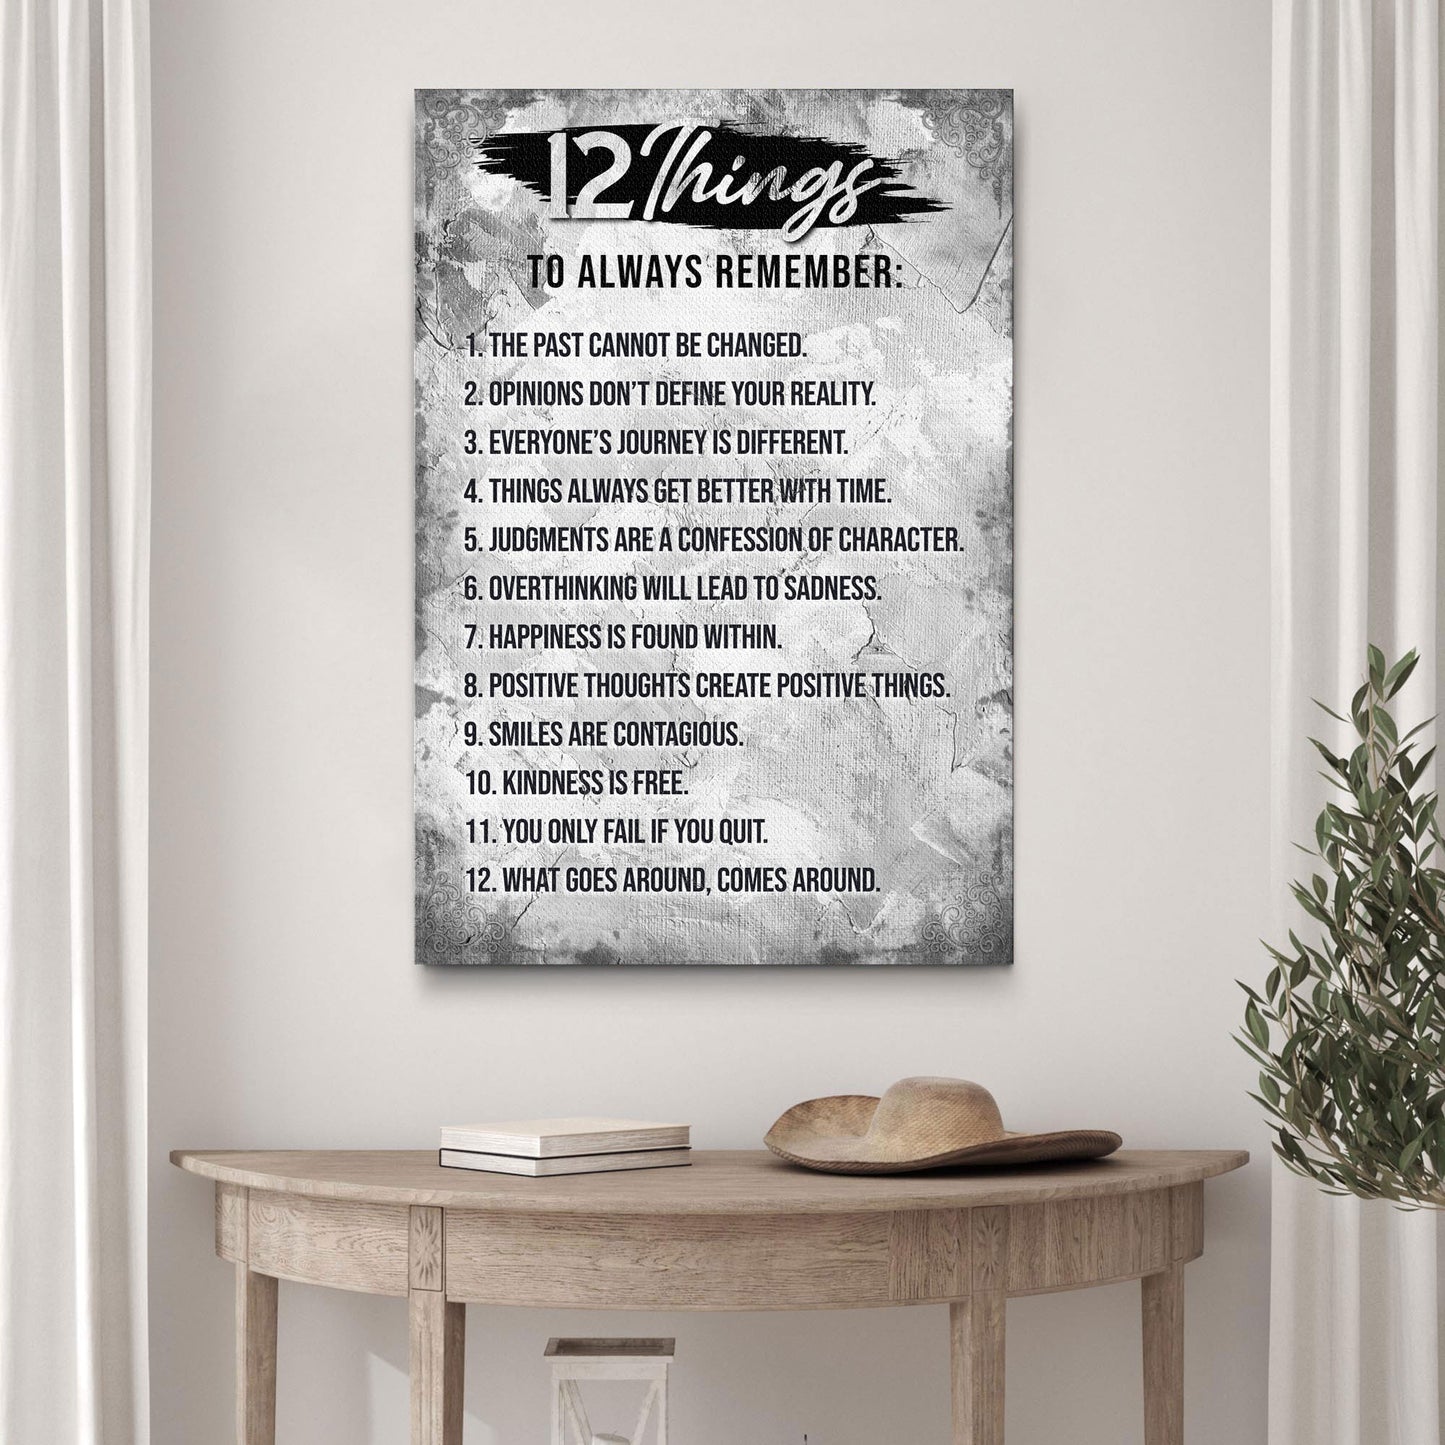 12 Things To Remember Sign Style 1 - Image by Tailored Canvases